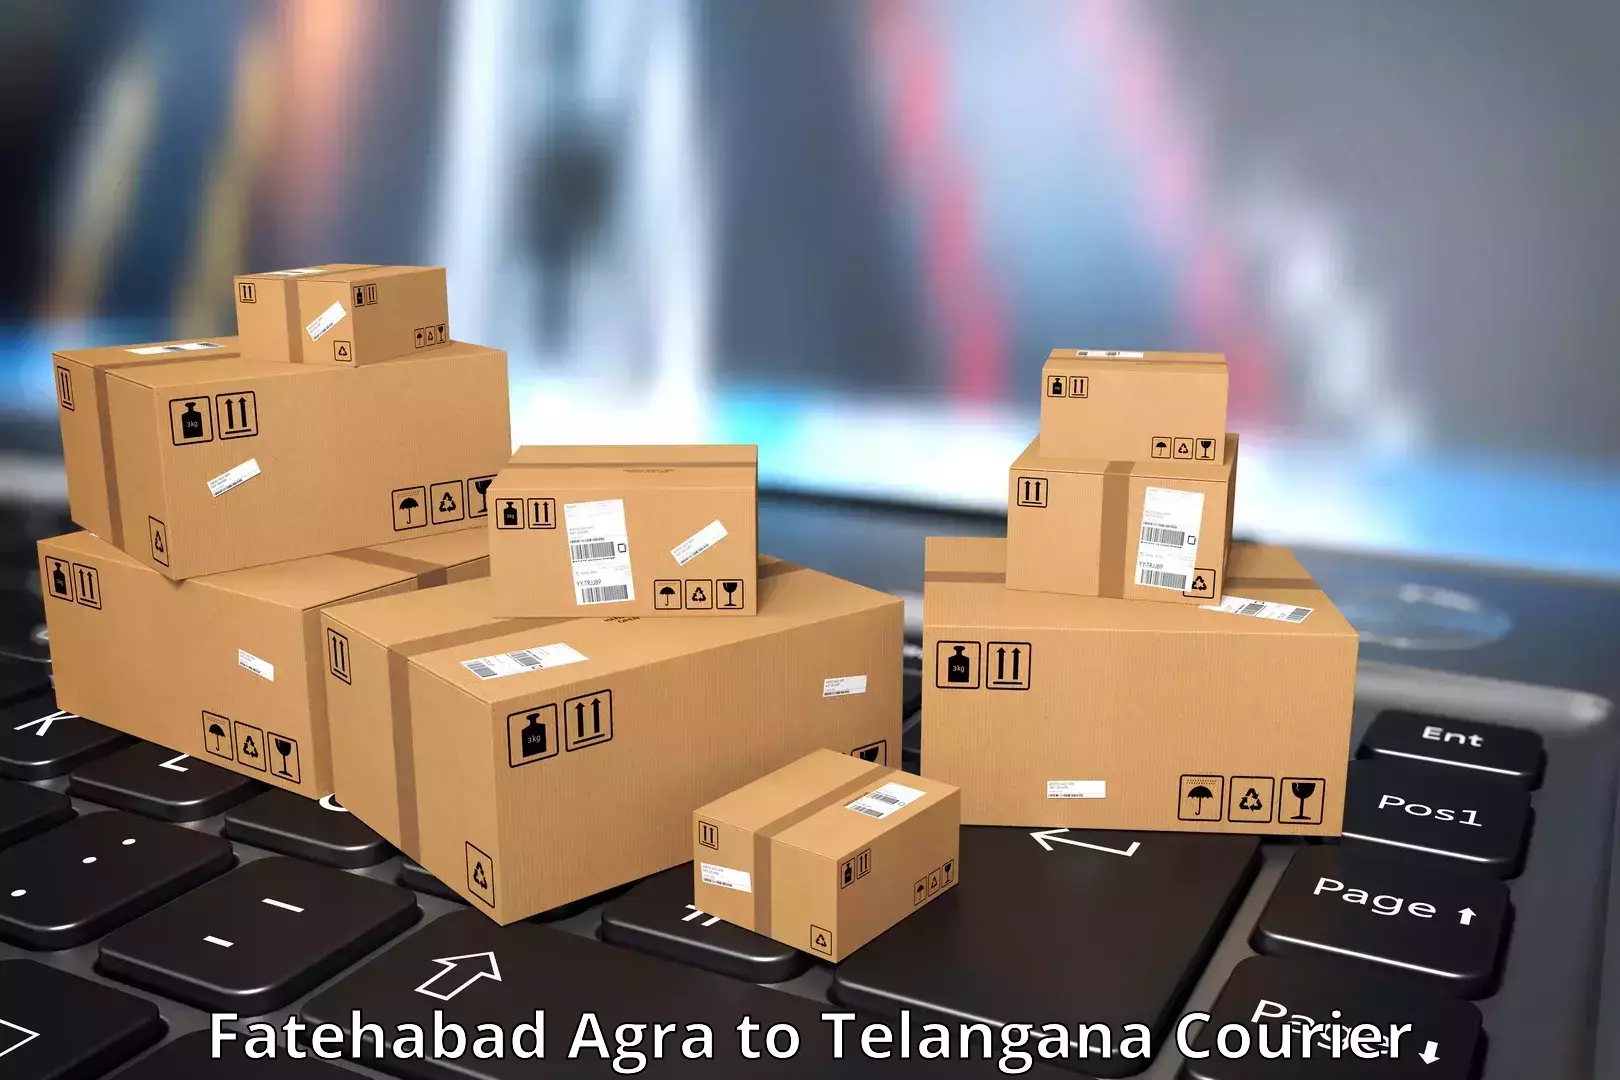 Courier service efficiency Fatehabad Agra to Telangana